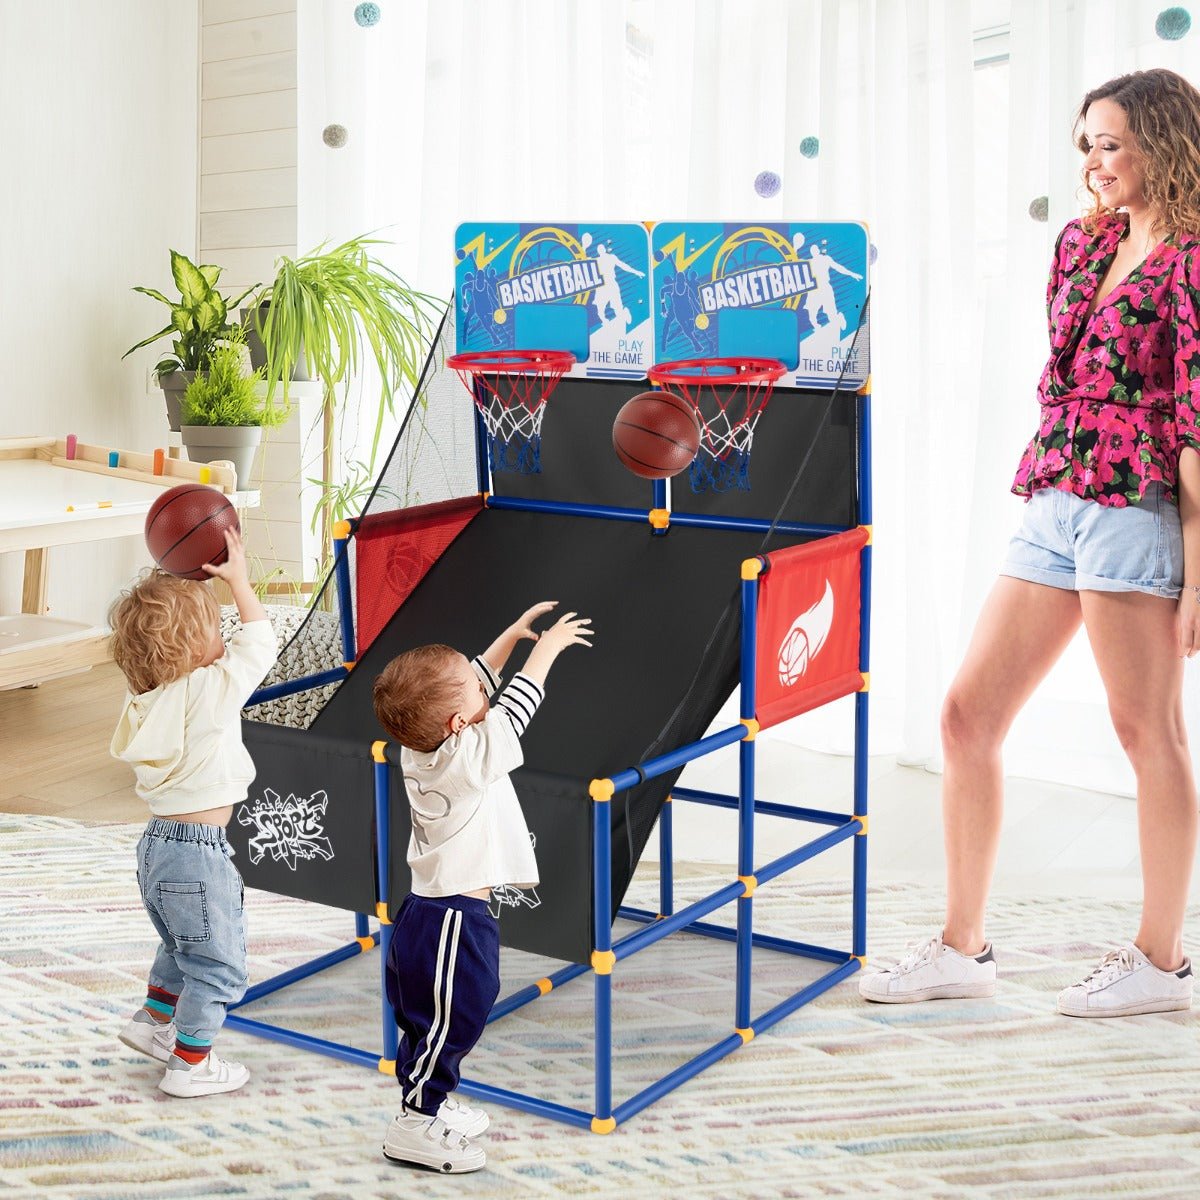 Shoot and Score: Dual Shot Basketball Hoop Arcade Game for Kids